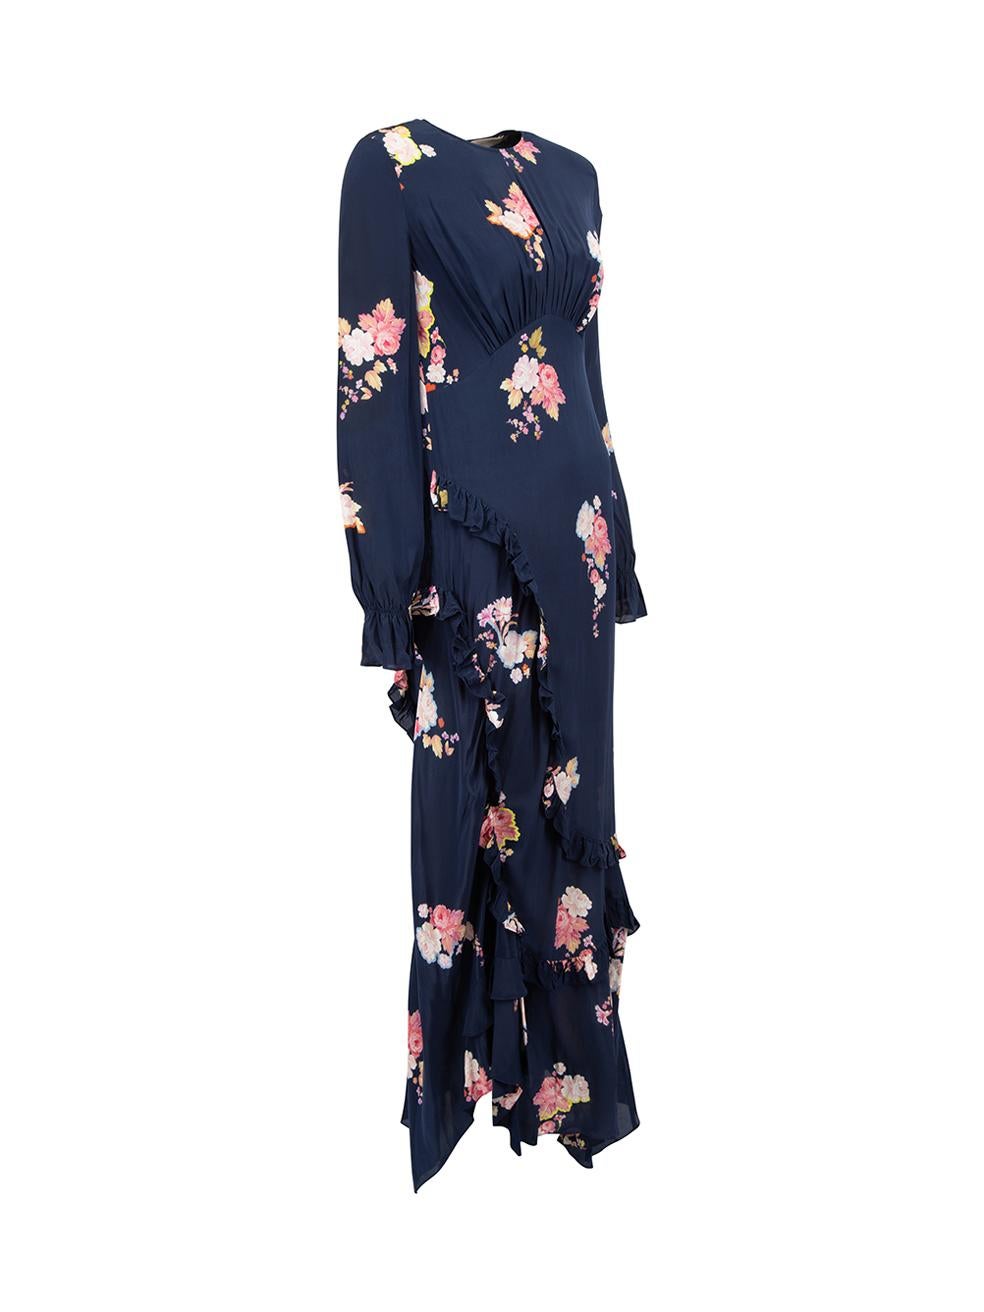 CONDITION is Never worn, with tags. No visible wear to dress is evident on this new Preen Line designer resale item. 



Details


Navy

Viscose

Maxi dress

Slightly see through

Floral print pattern

Round neckline

Ruffles accent

Elasticated